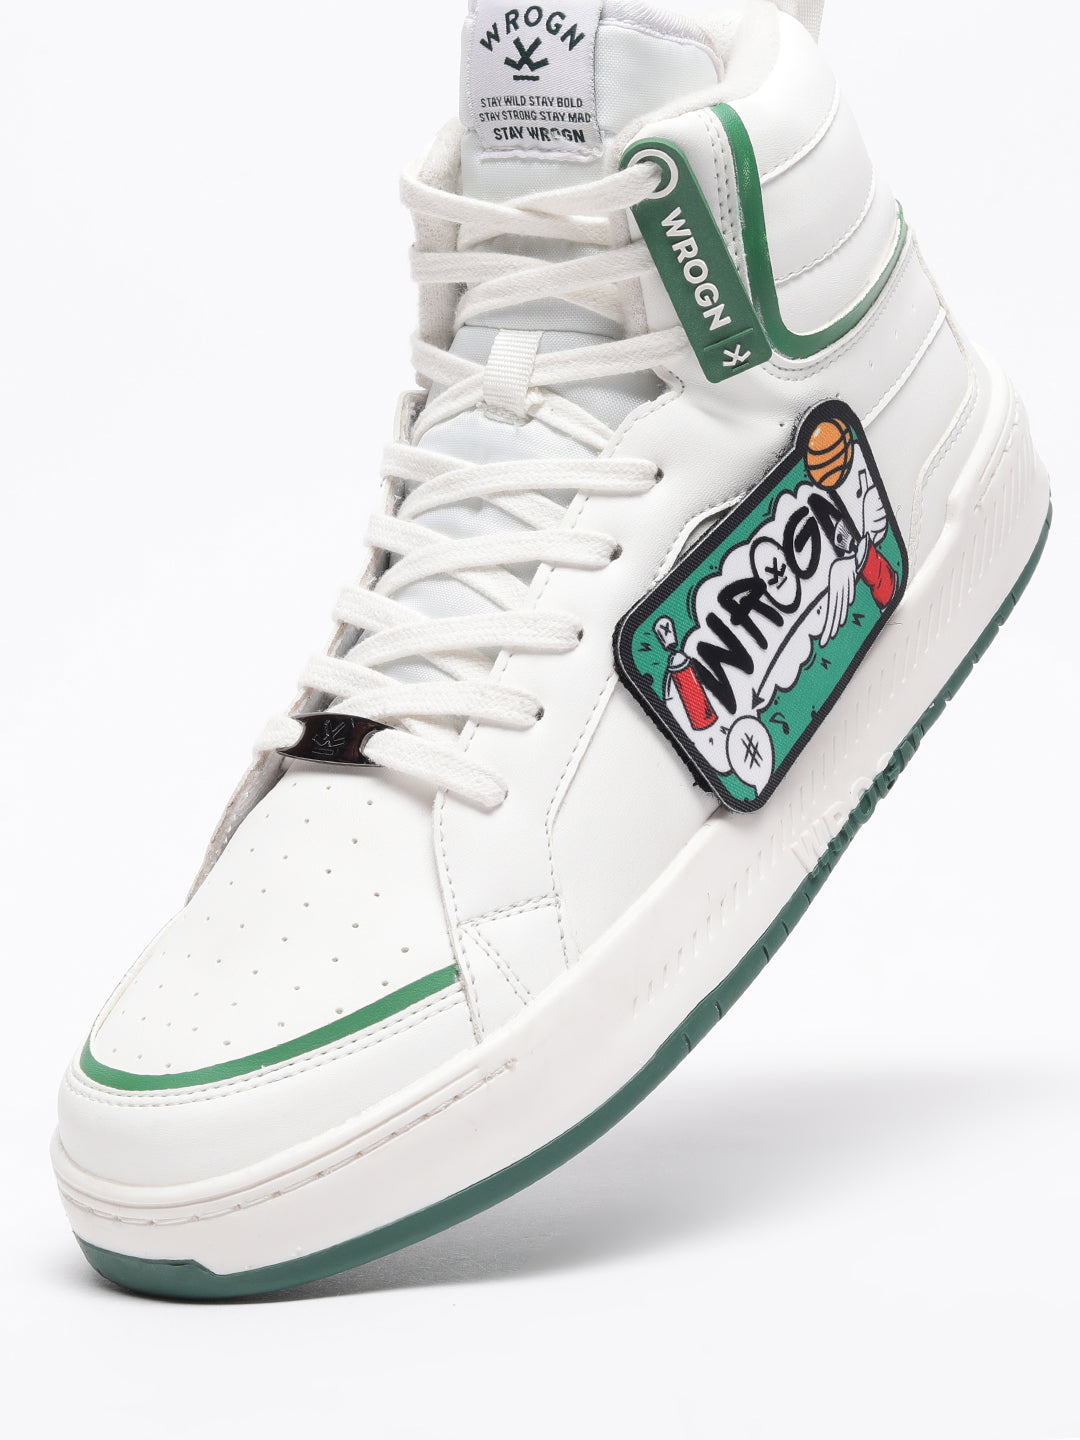 Wrogn Patch White High Top Sneakers